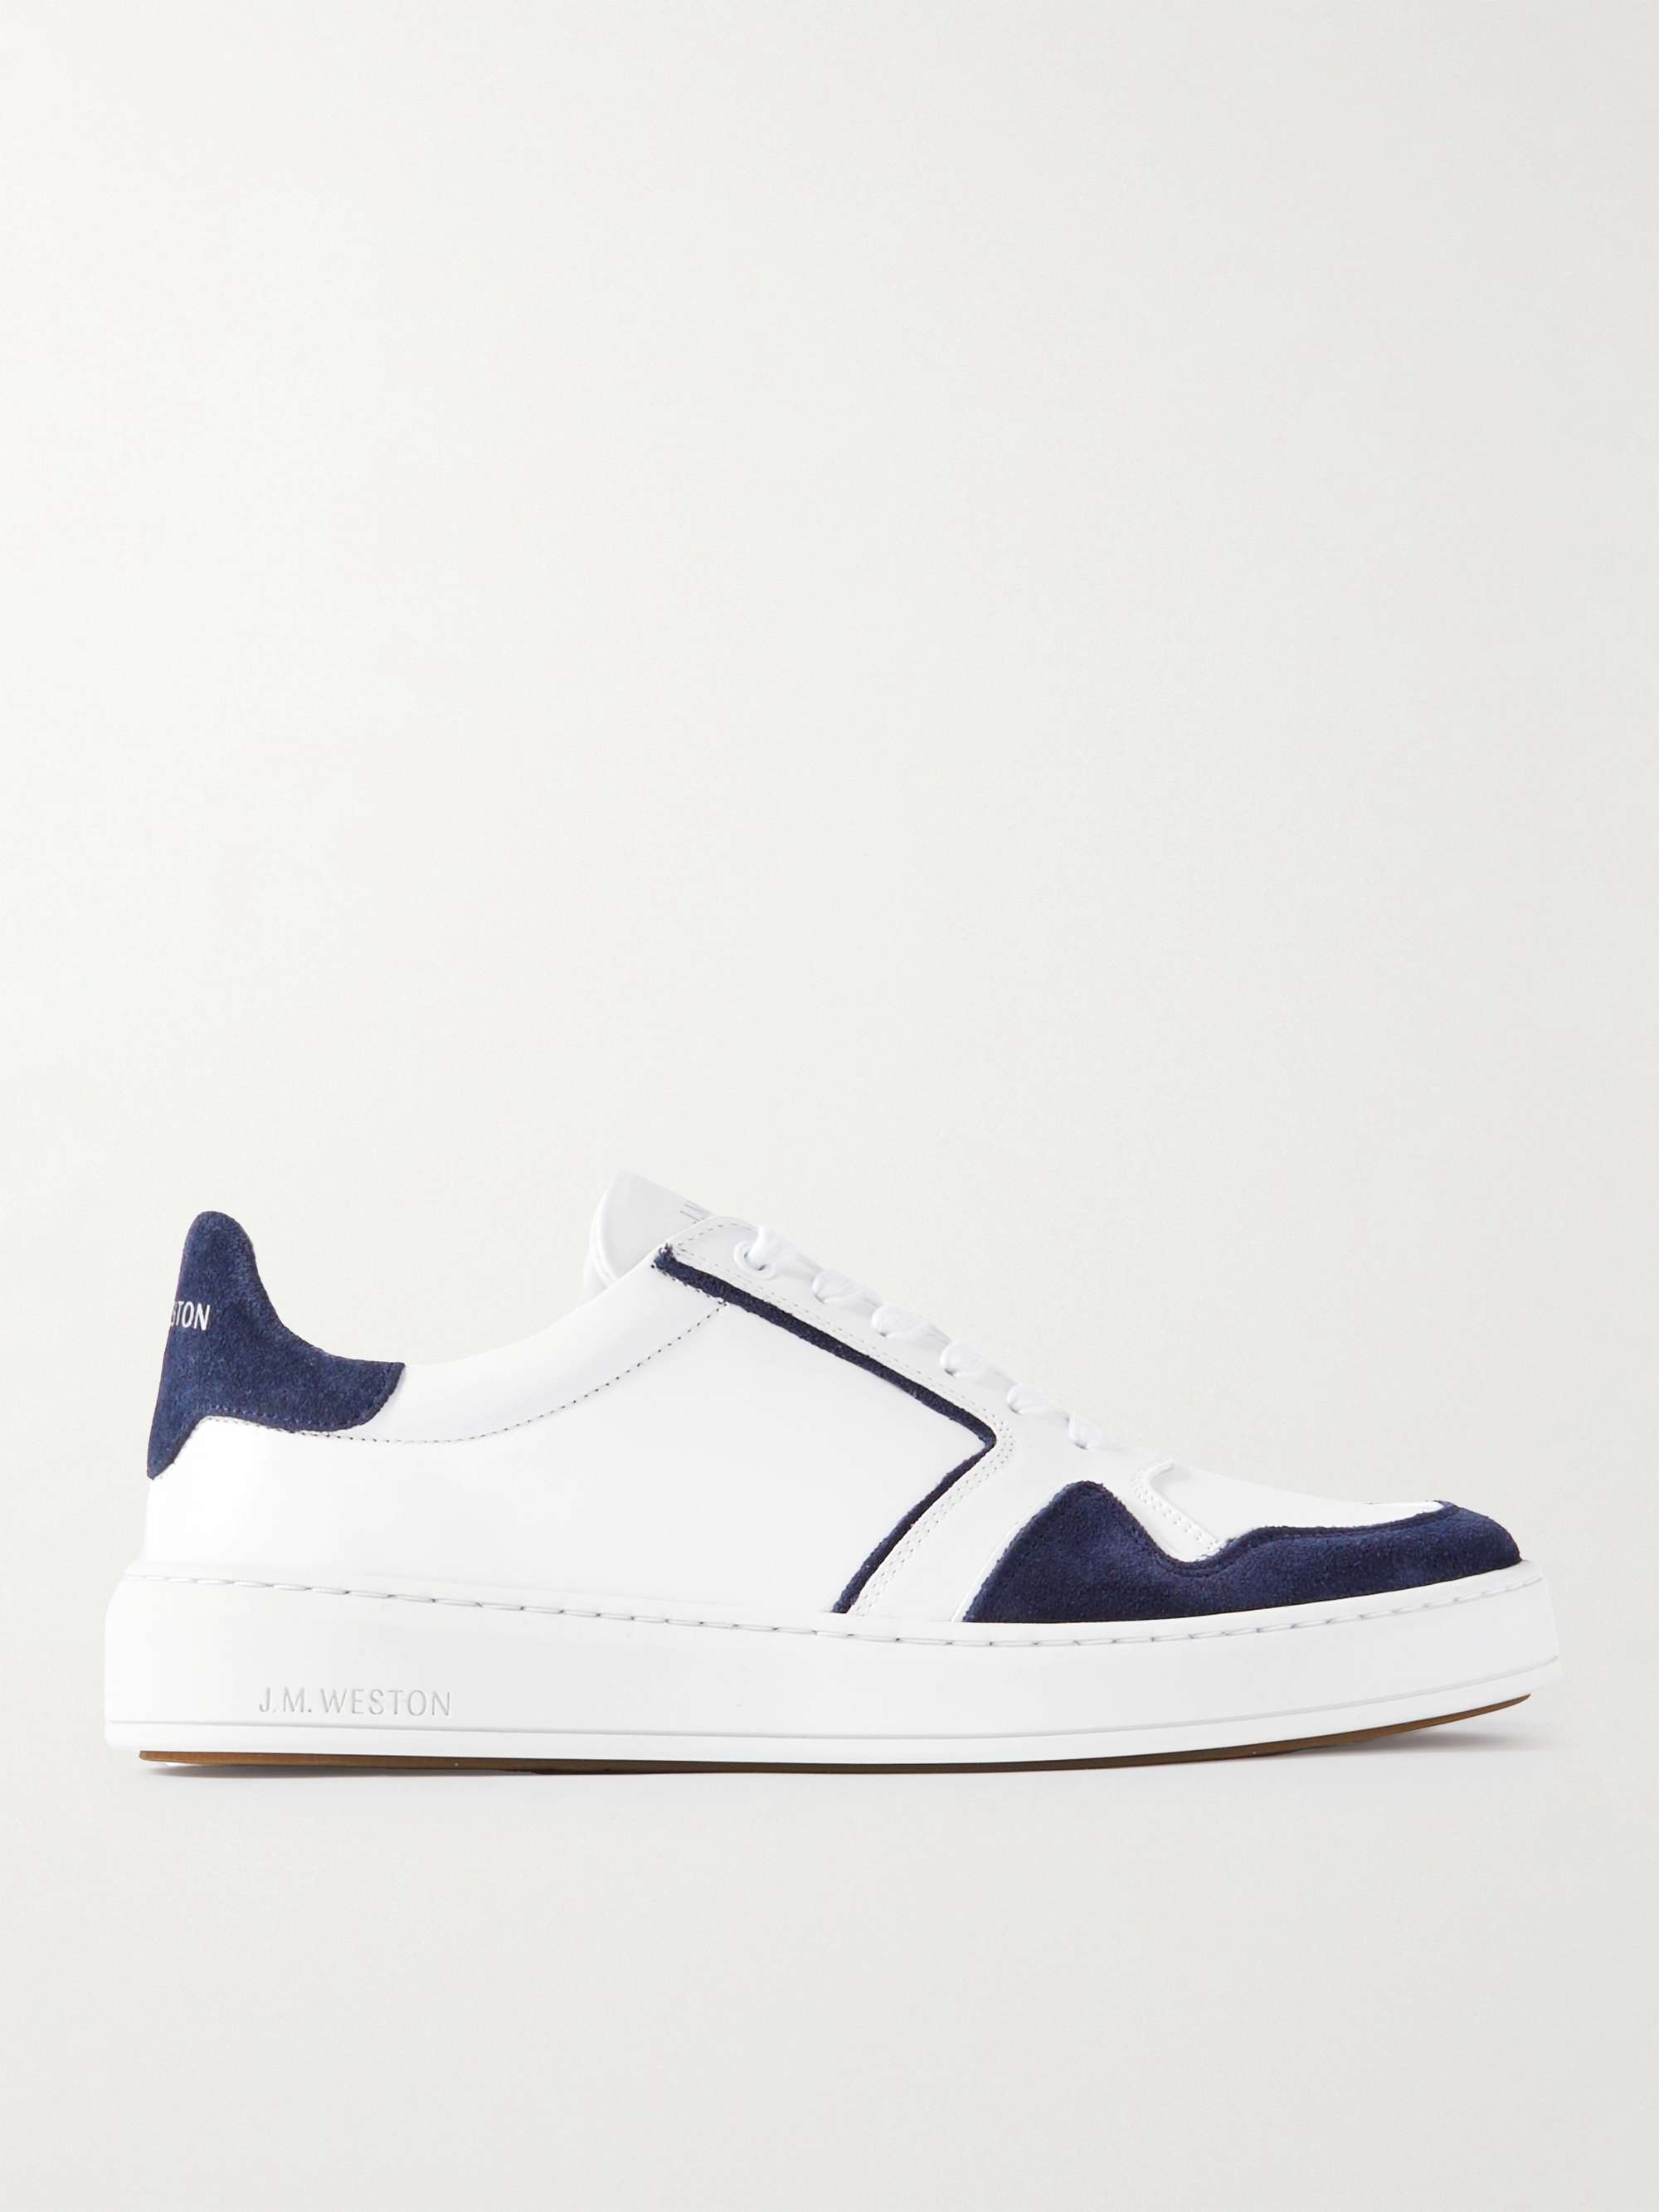 J.M. WESTON On Time Oxford Suede-Trimmed Leather Sneakers for Men | MR  PORTER